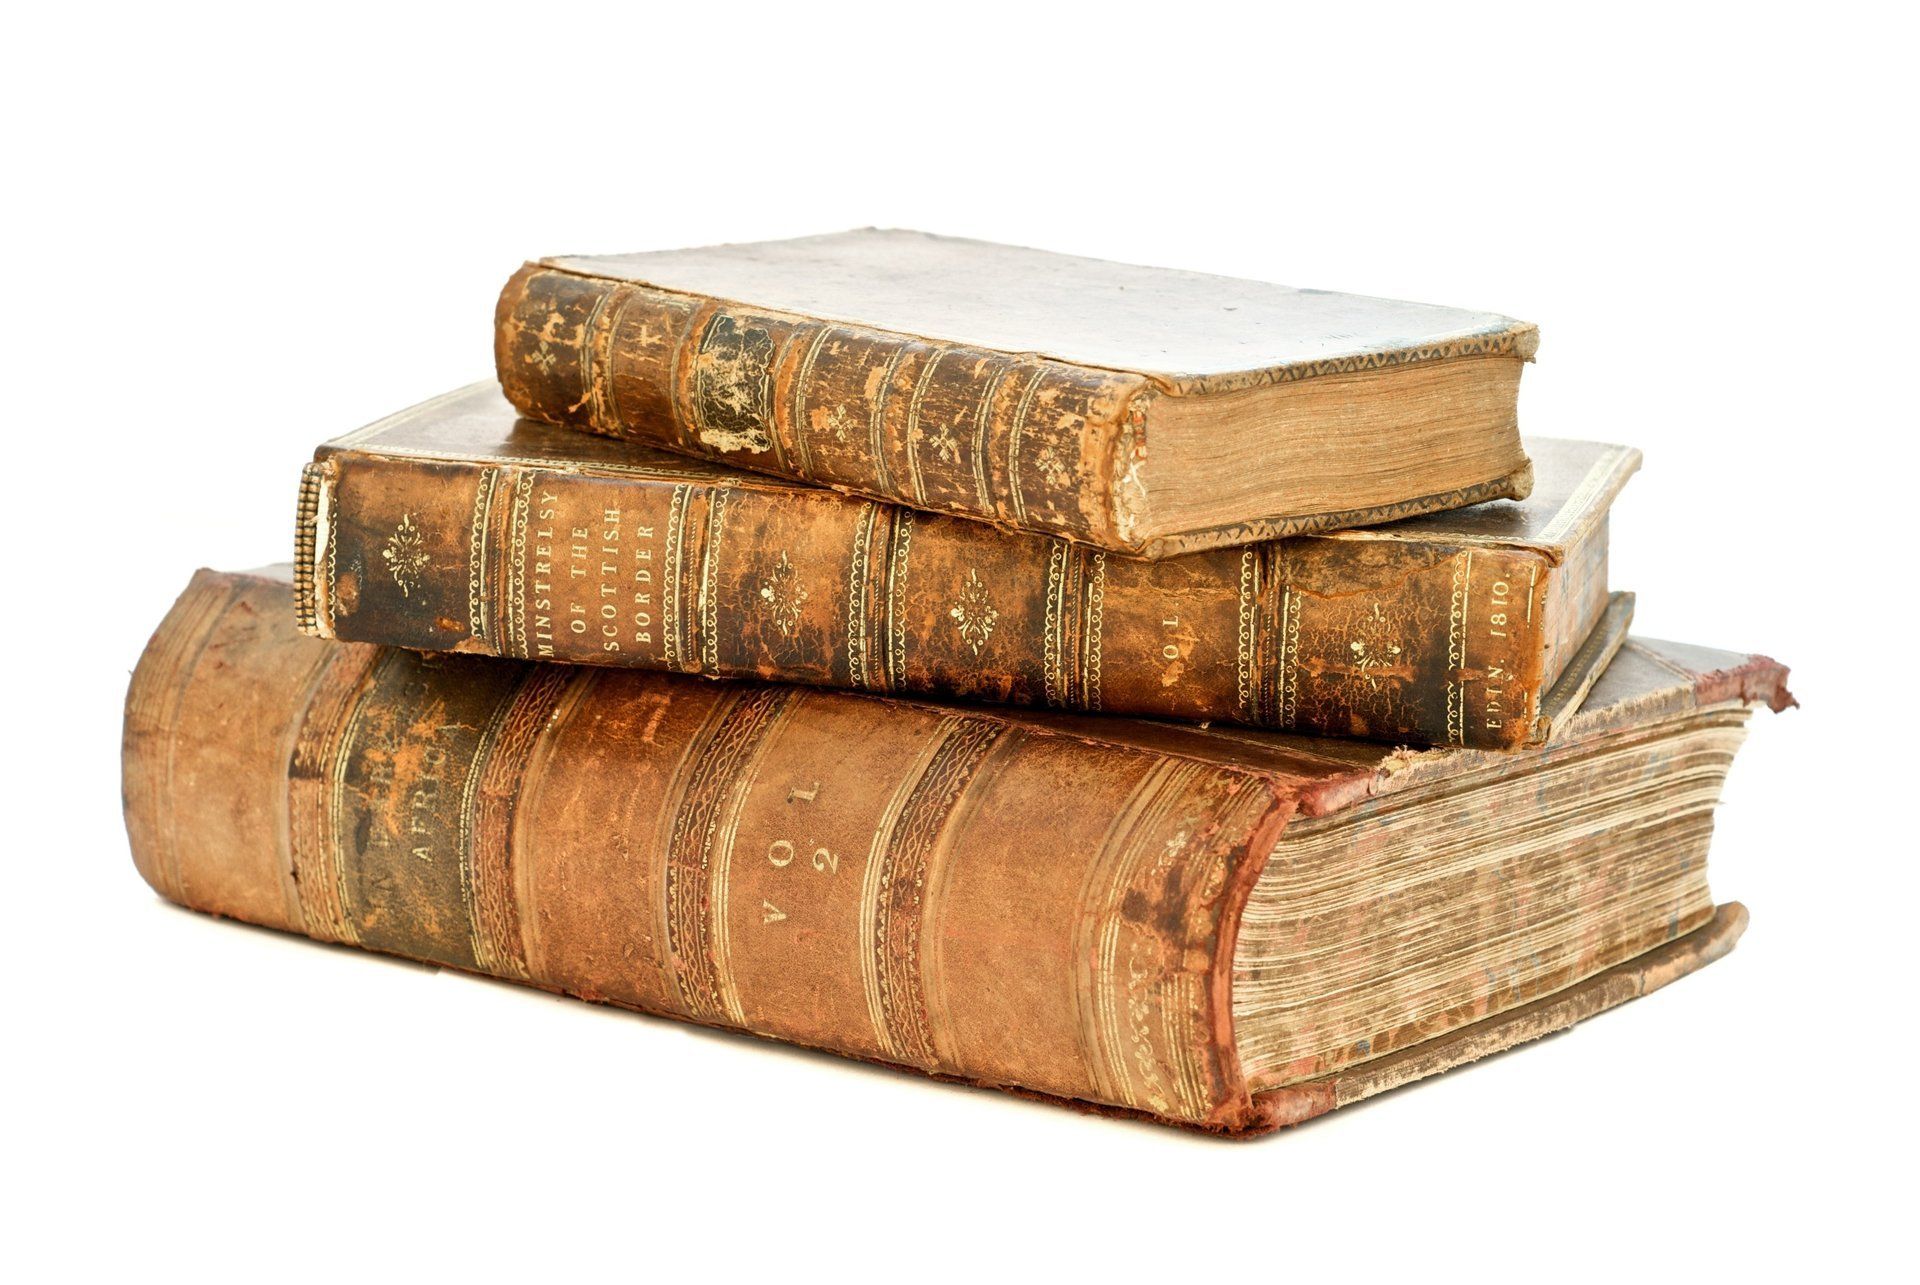 Three ancient-looking books sitting on a white surface